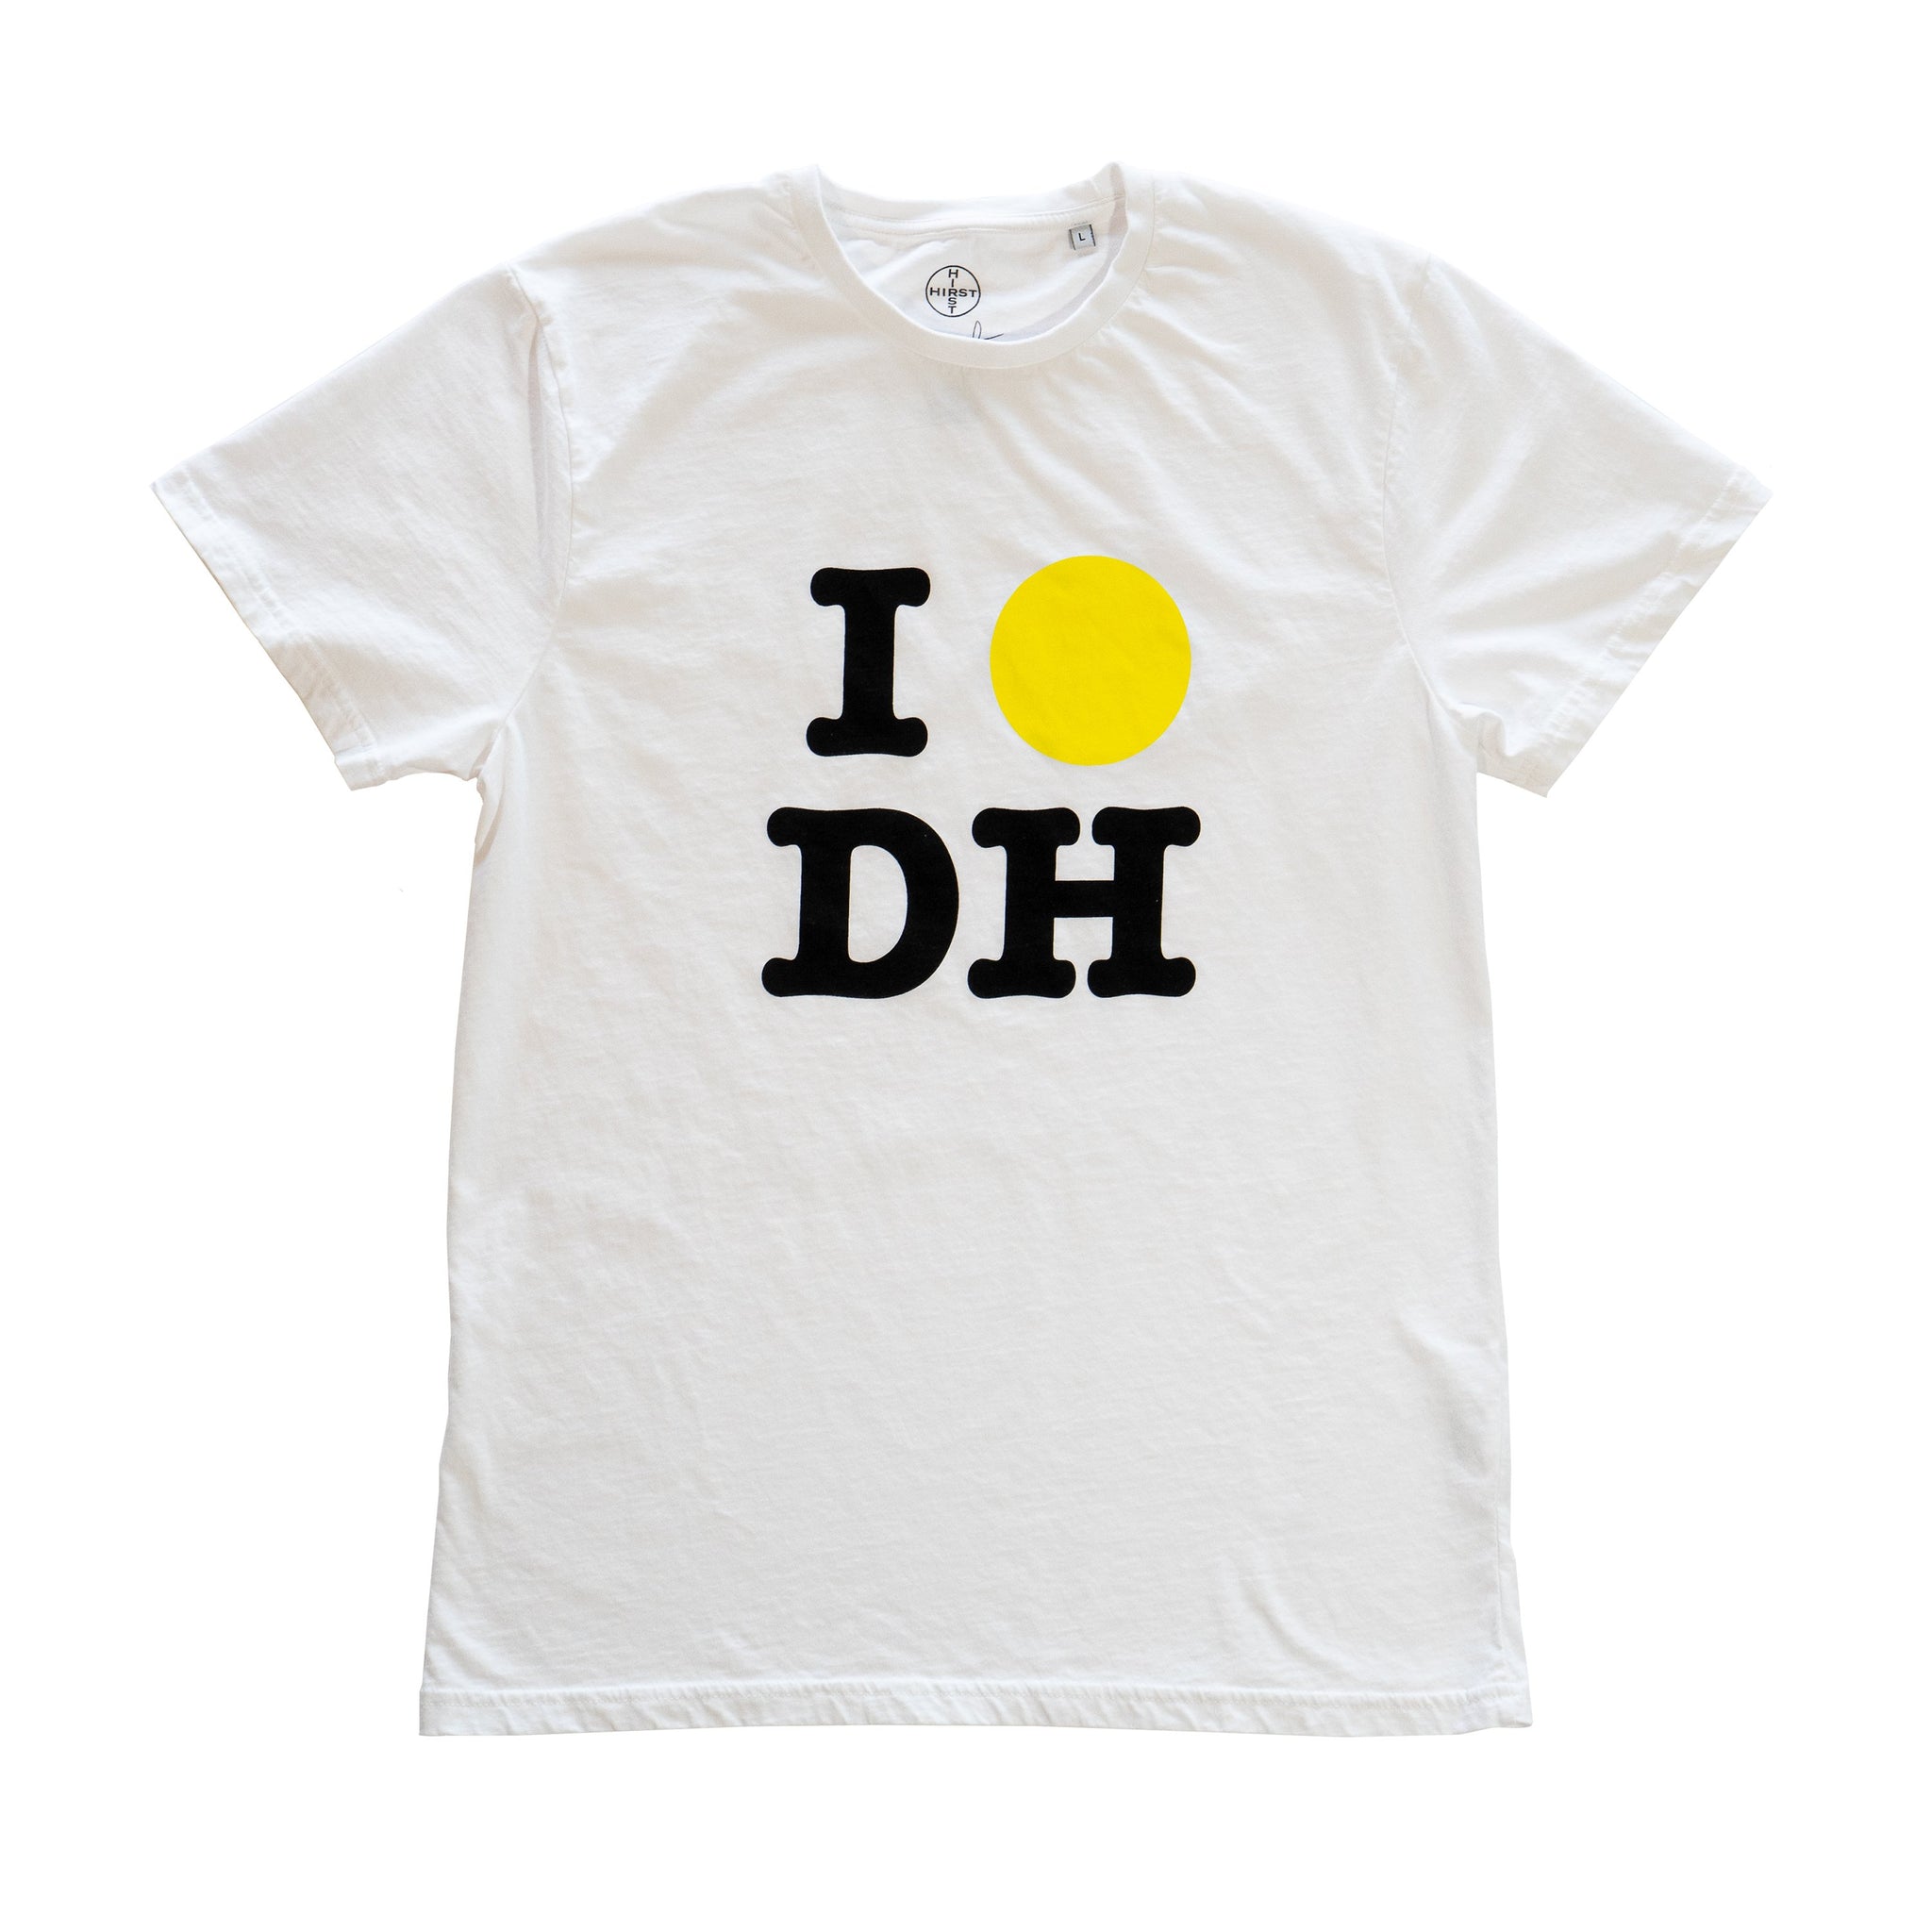 Damien Hirst: I “Spot” t-shirt in yellow